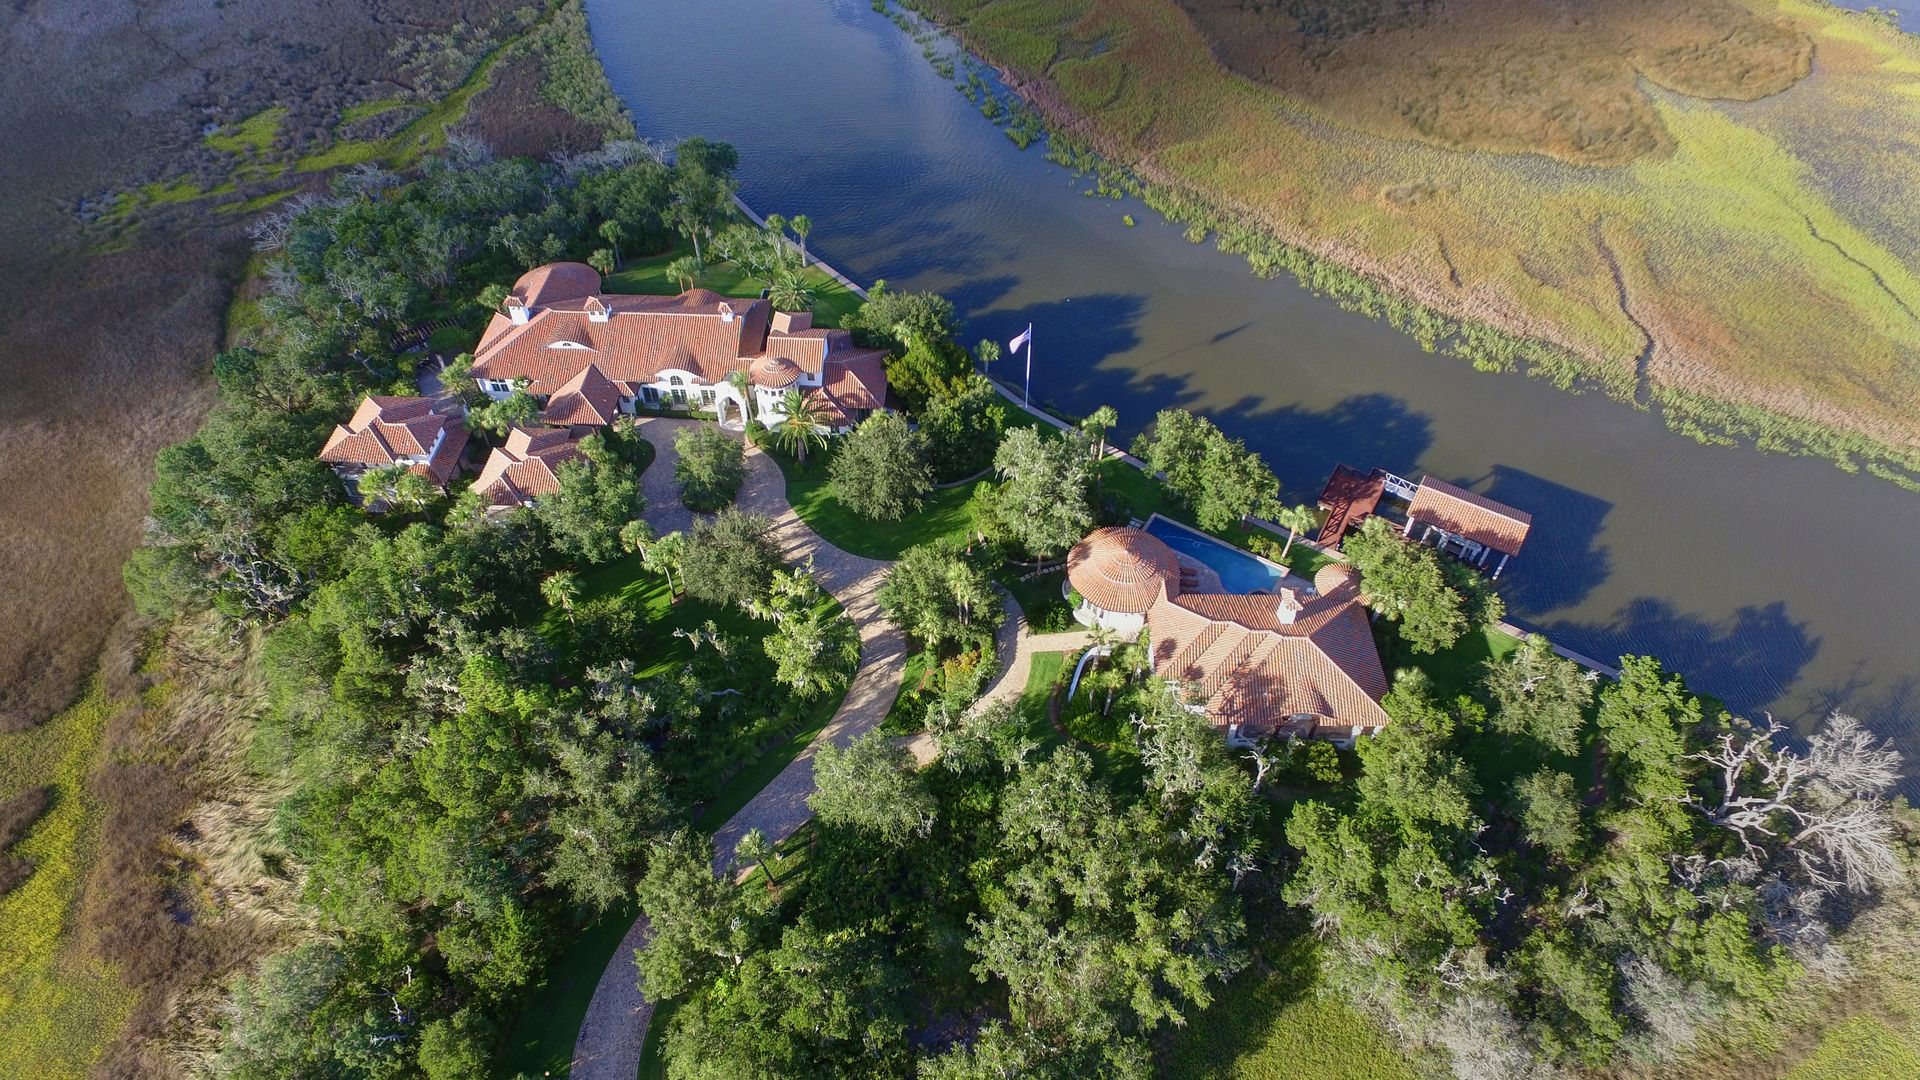 Massive house on the water from the air